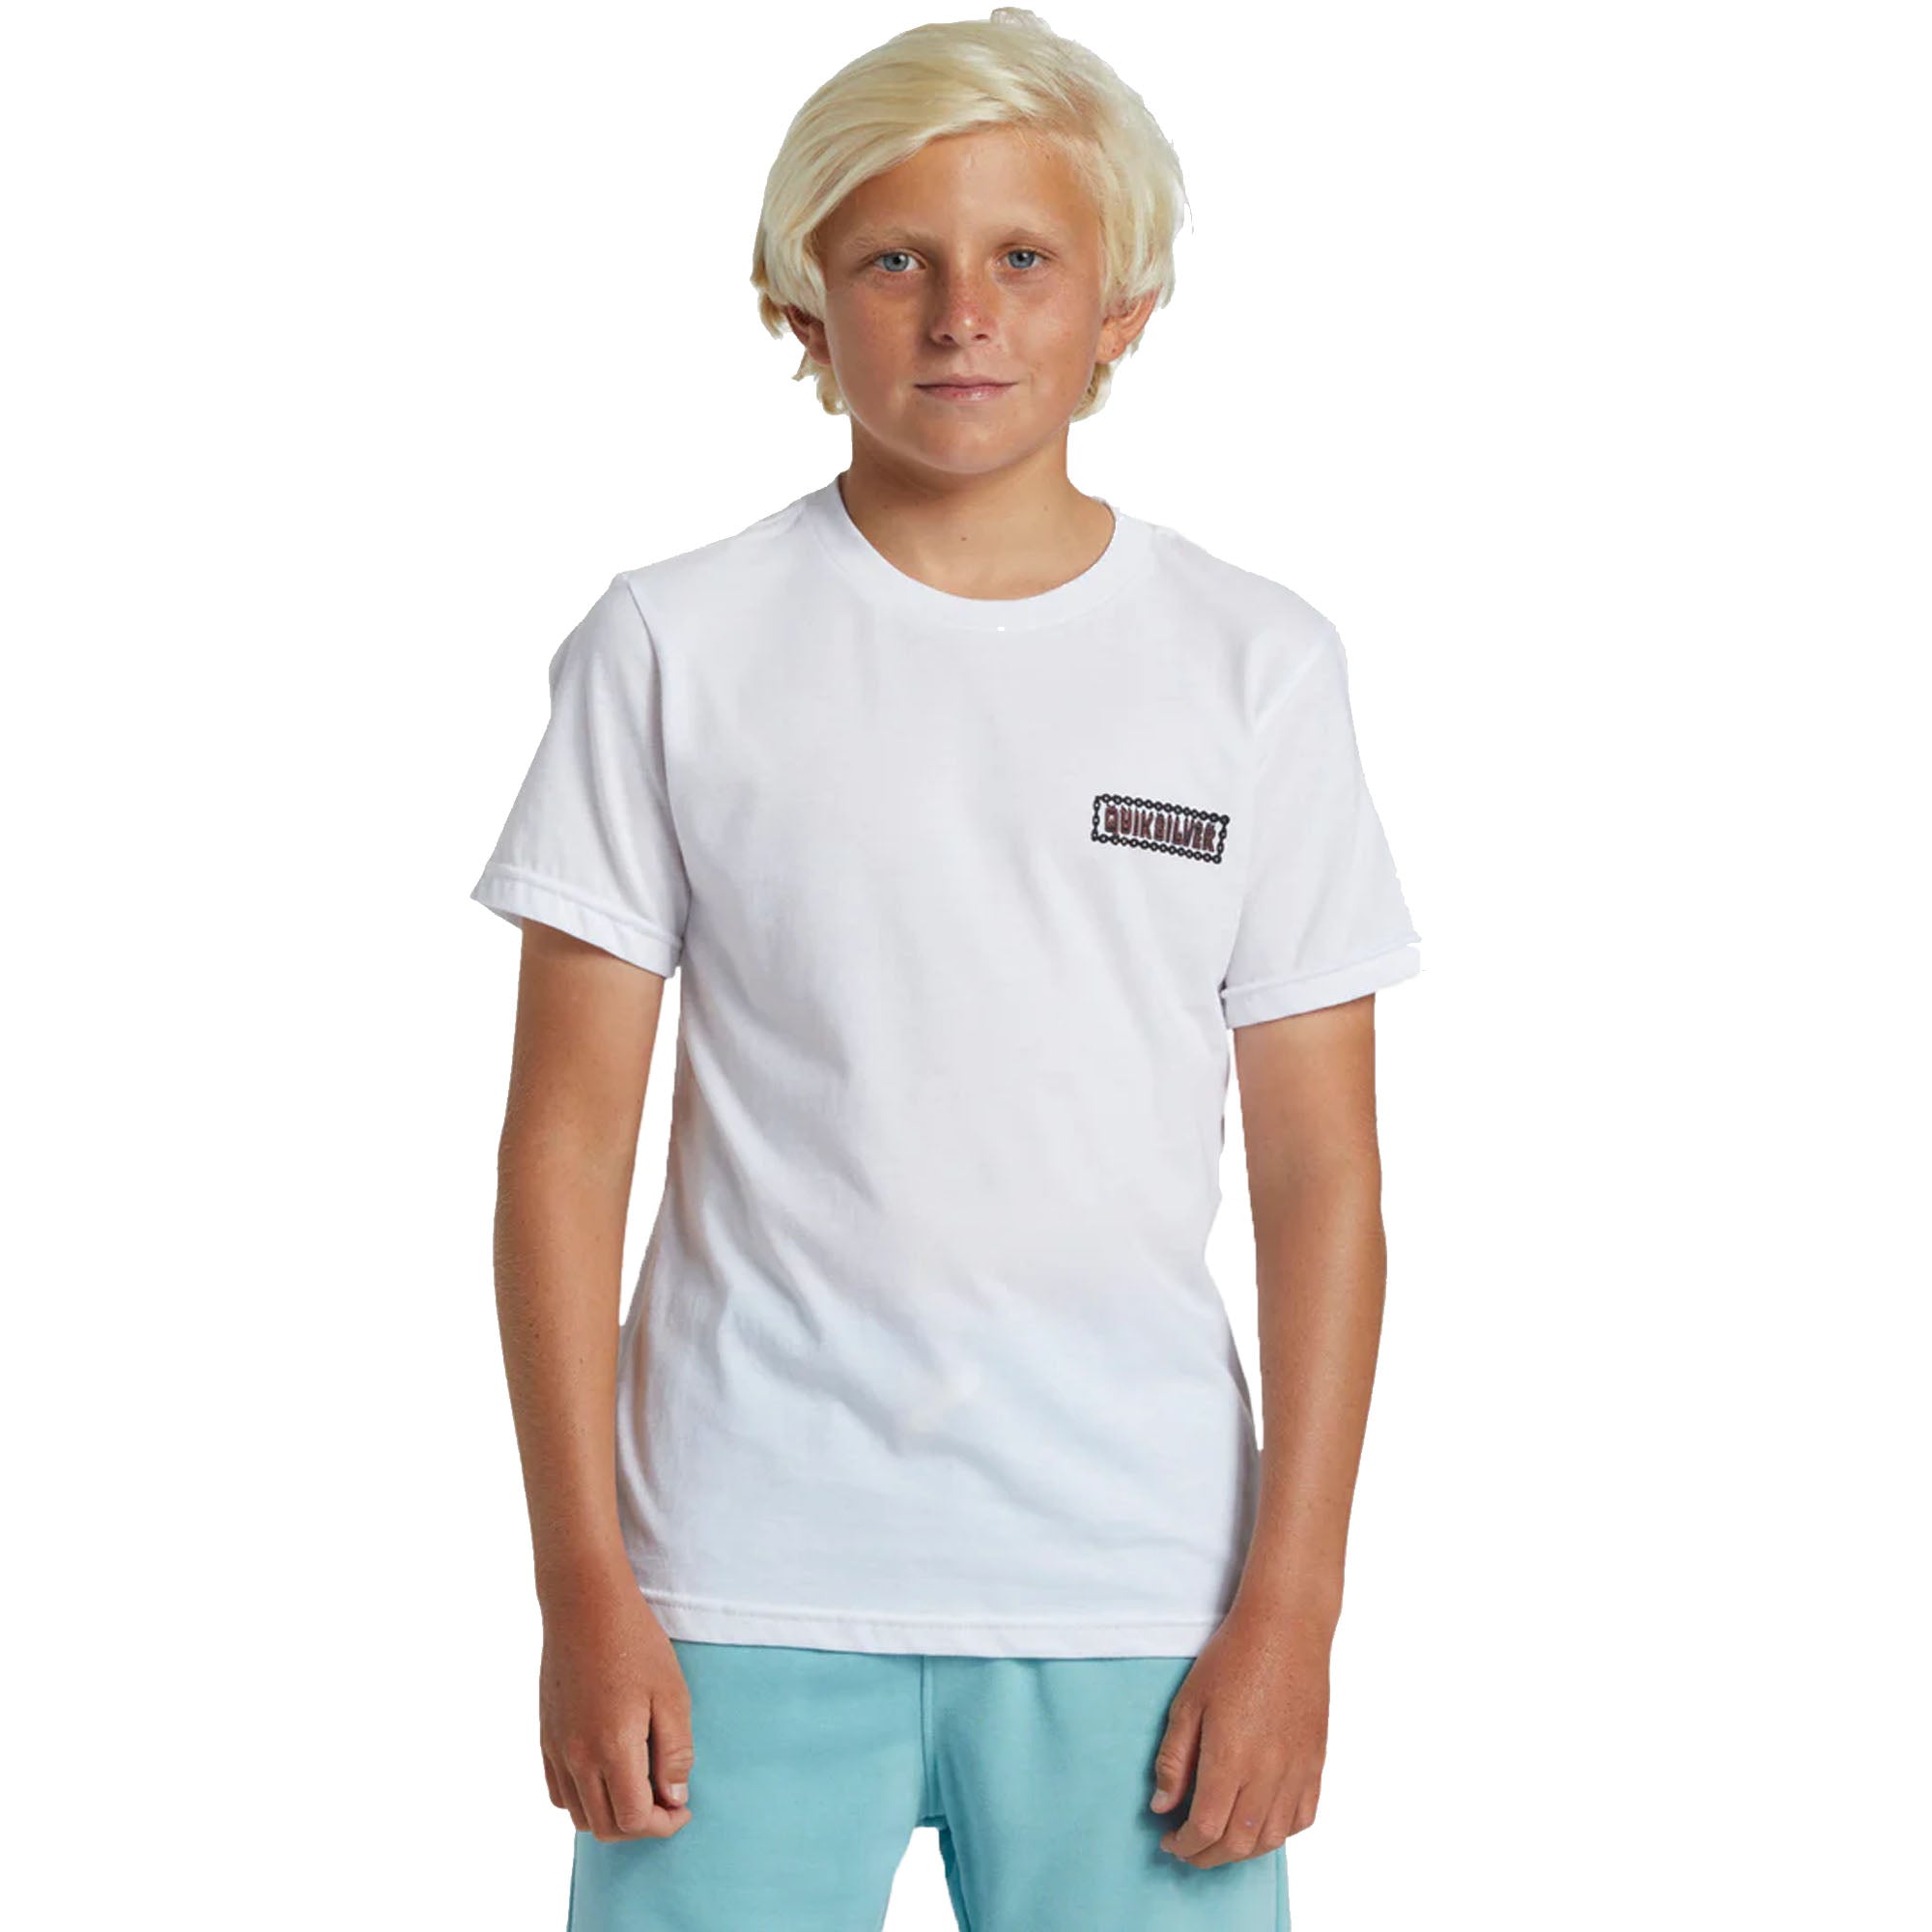 Quiksilver Marooned Youth Boys S/S T-Shirt